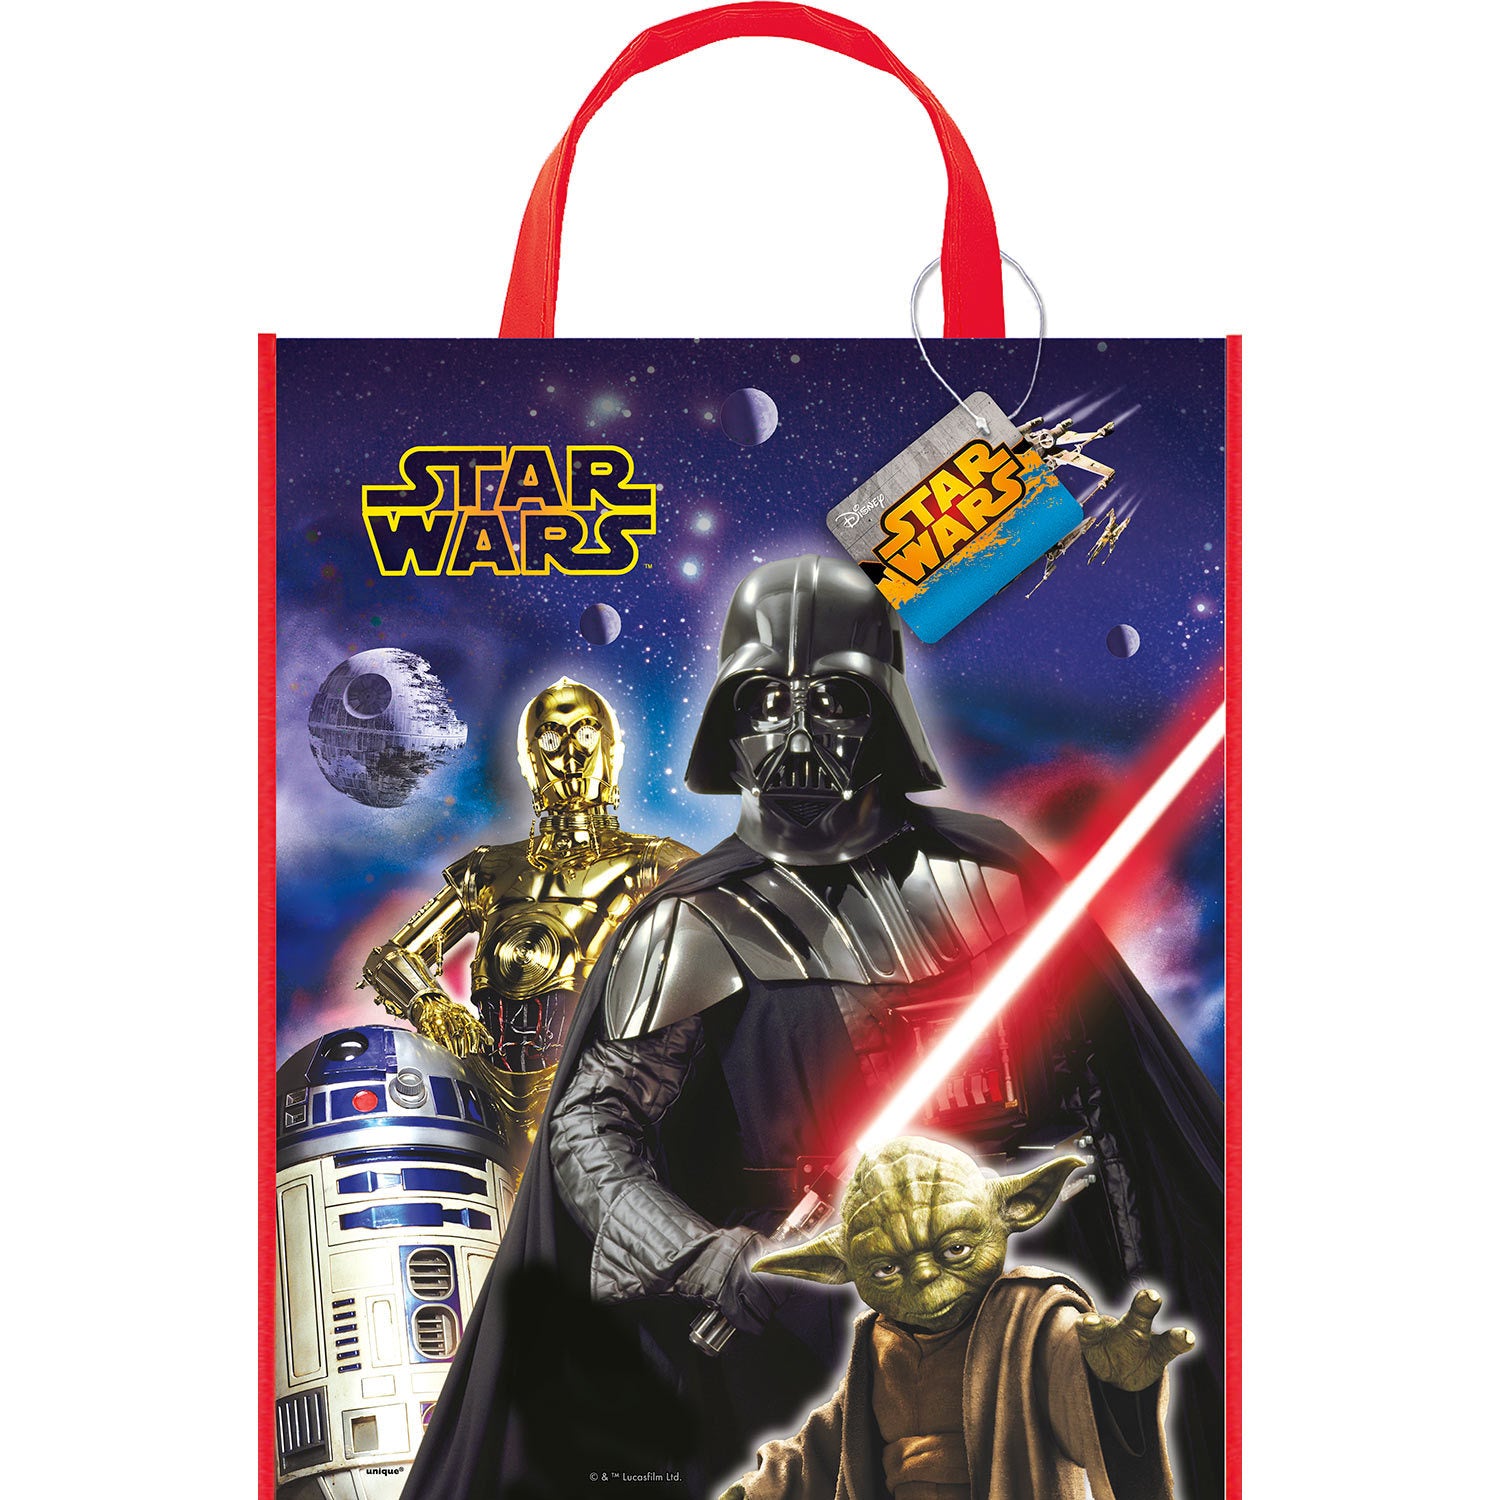 Star Wars Plastic Party Tote Bag